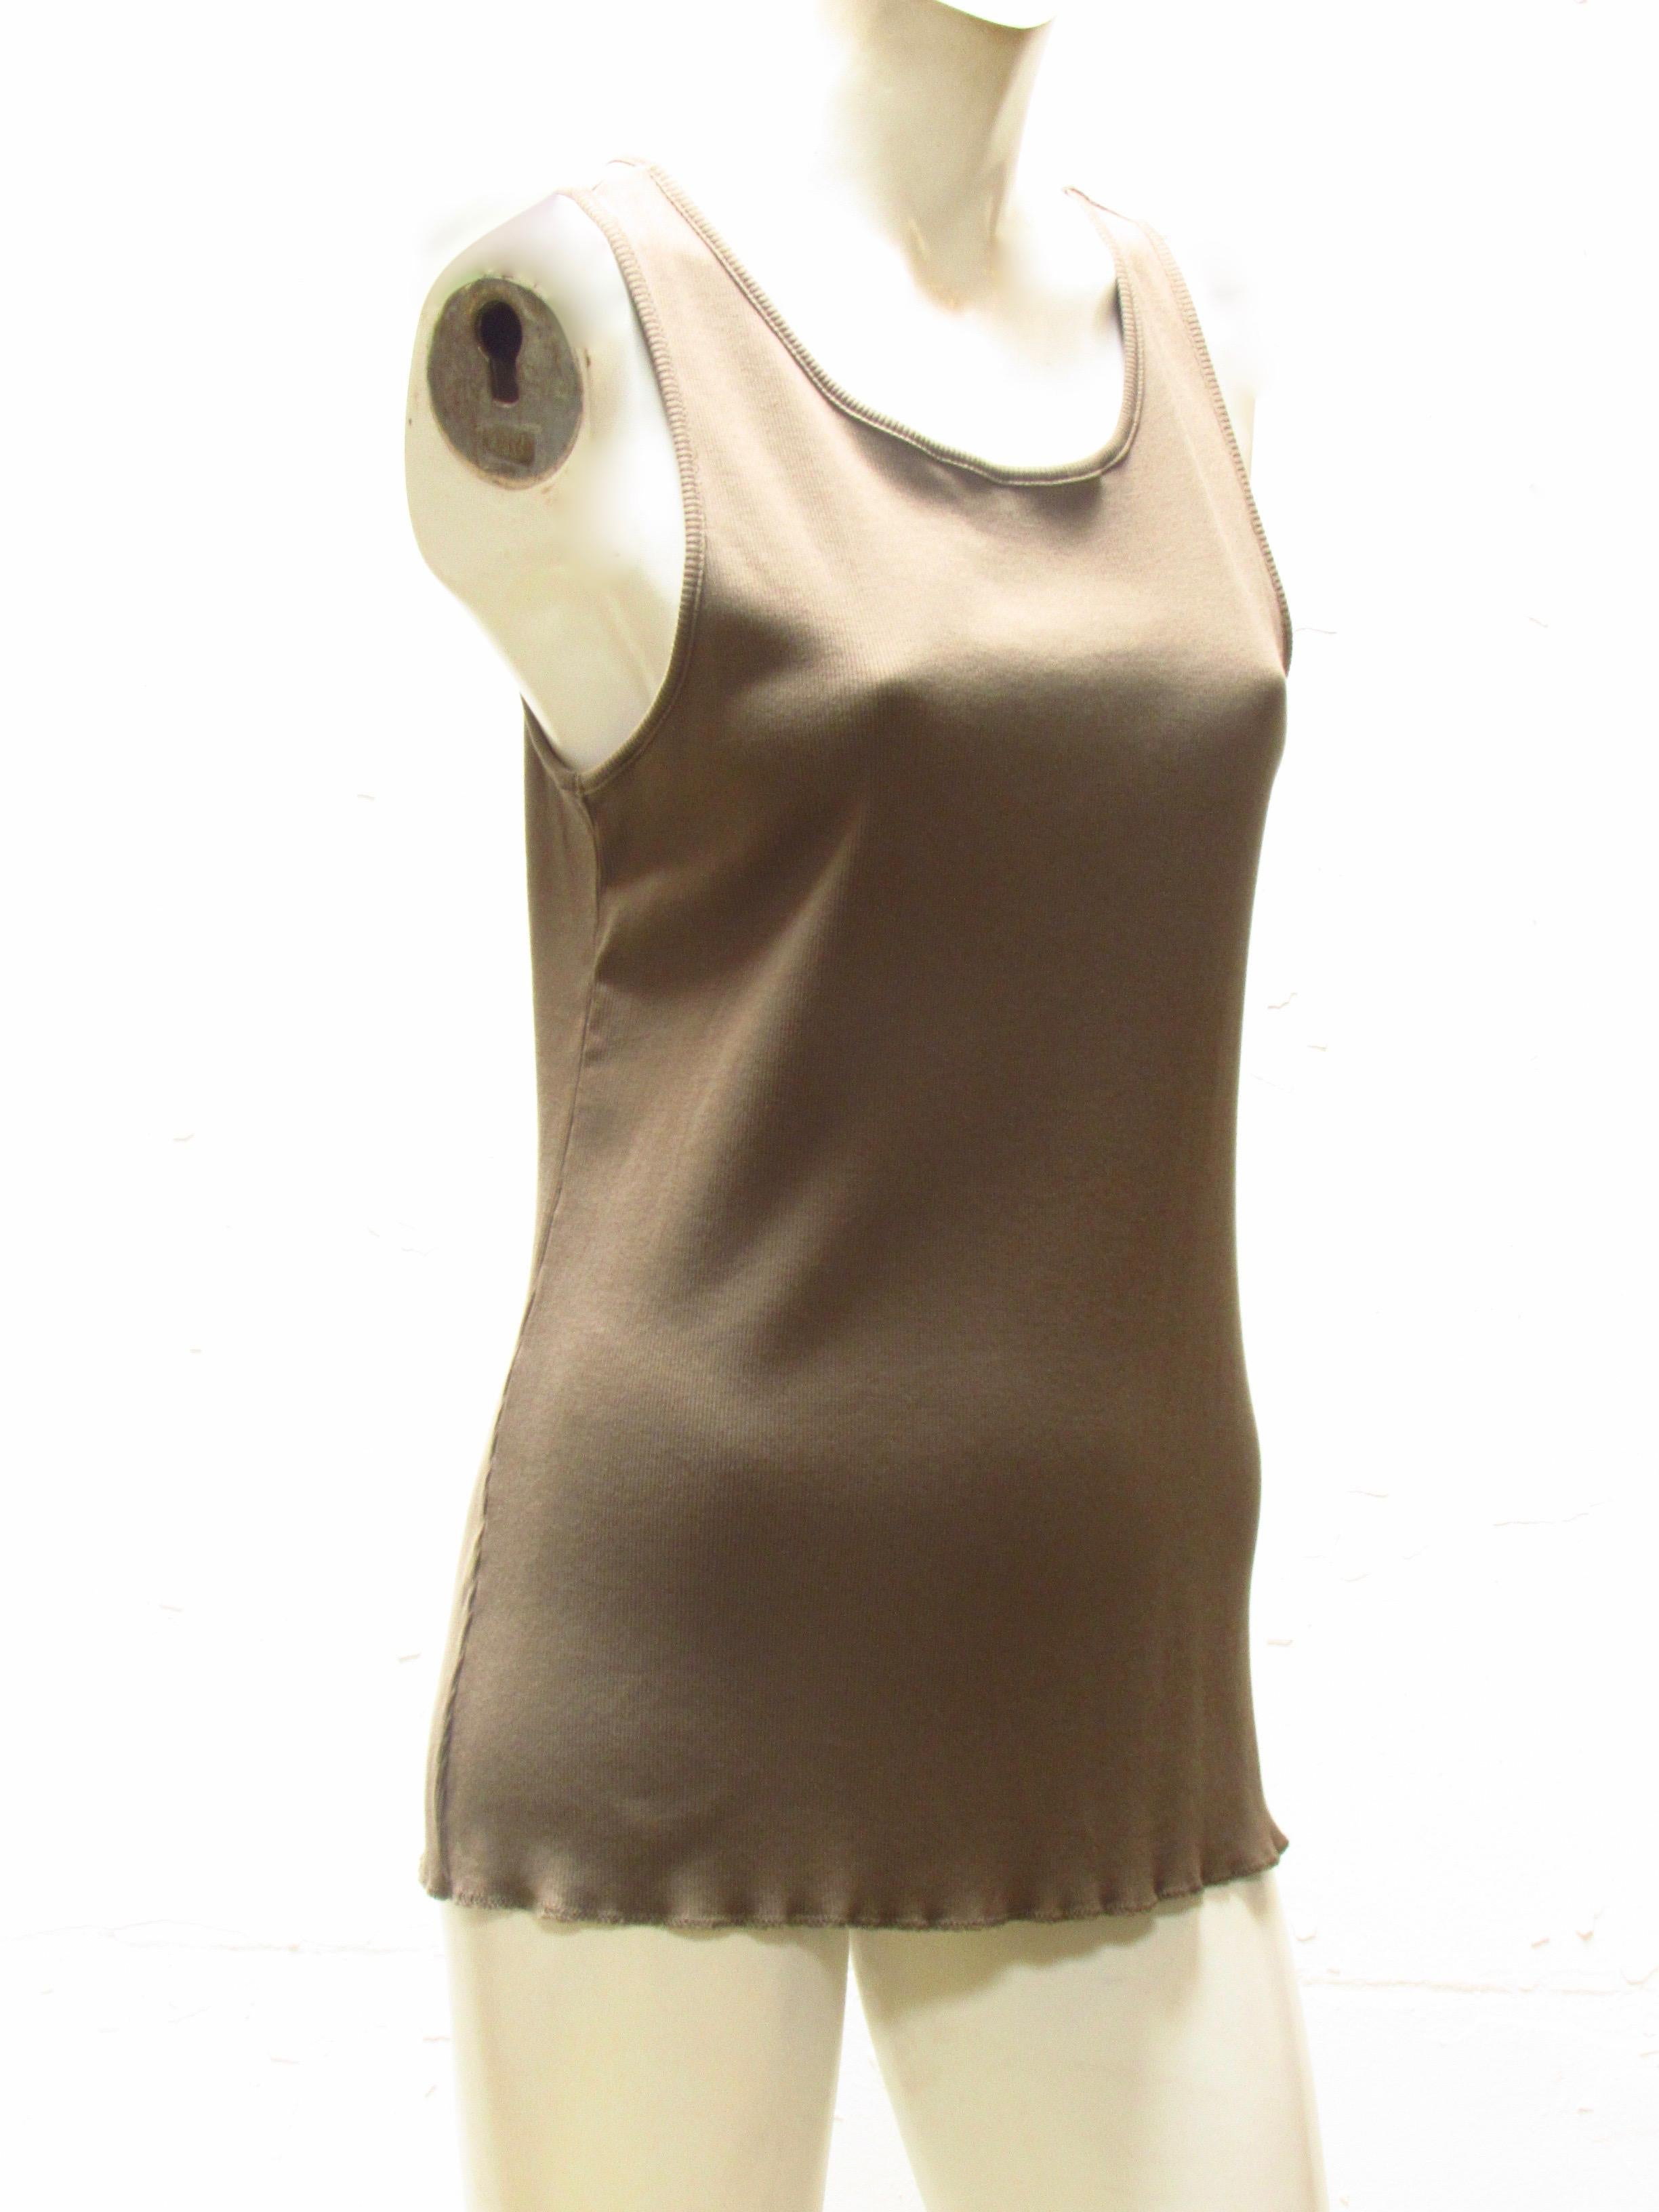 100% cotton ribbed scoop neck tank top comes to you from vintage Undercover. This mocha tank falls to natural hip. The front straps wrap around, halter-like in back where straps connect in racerback style. 